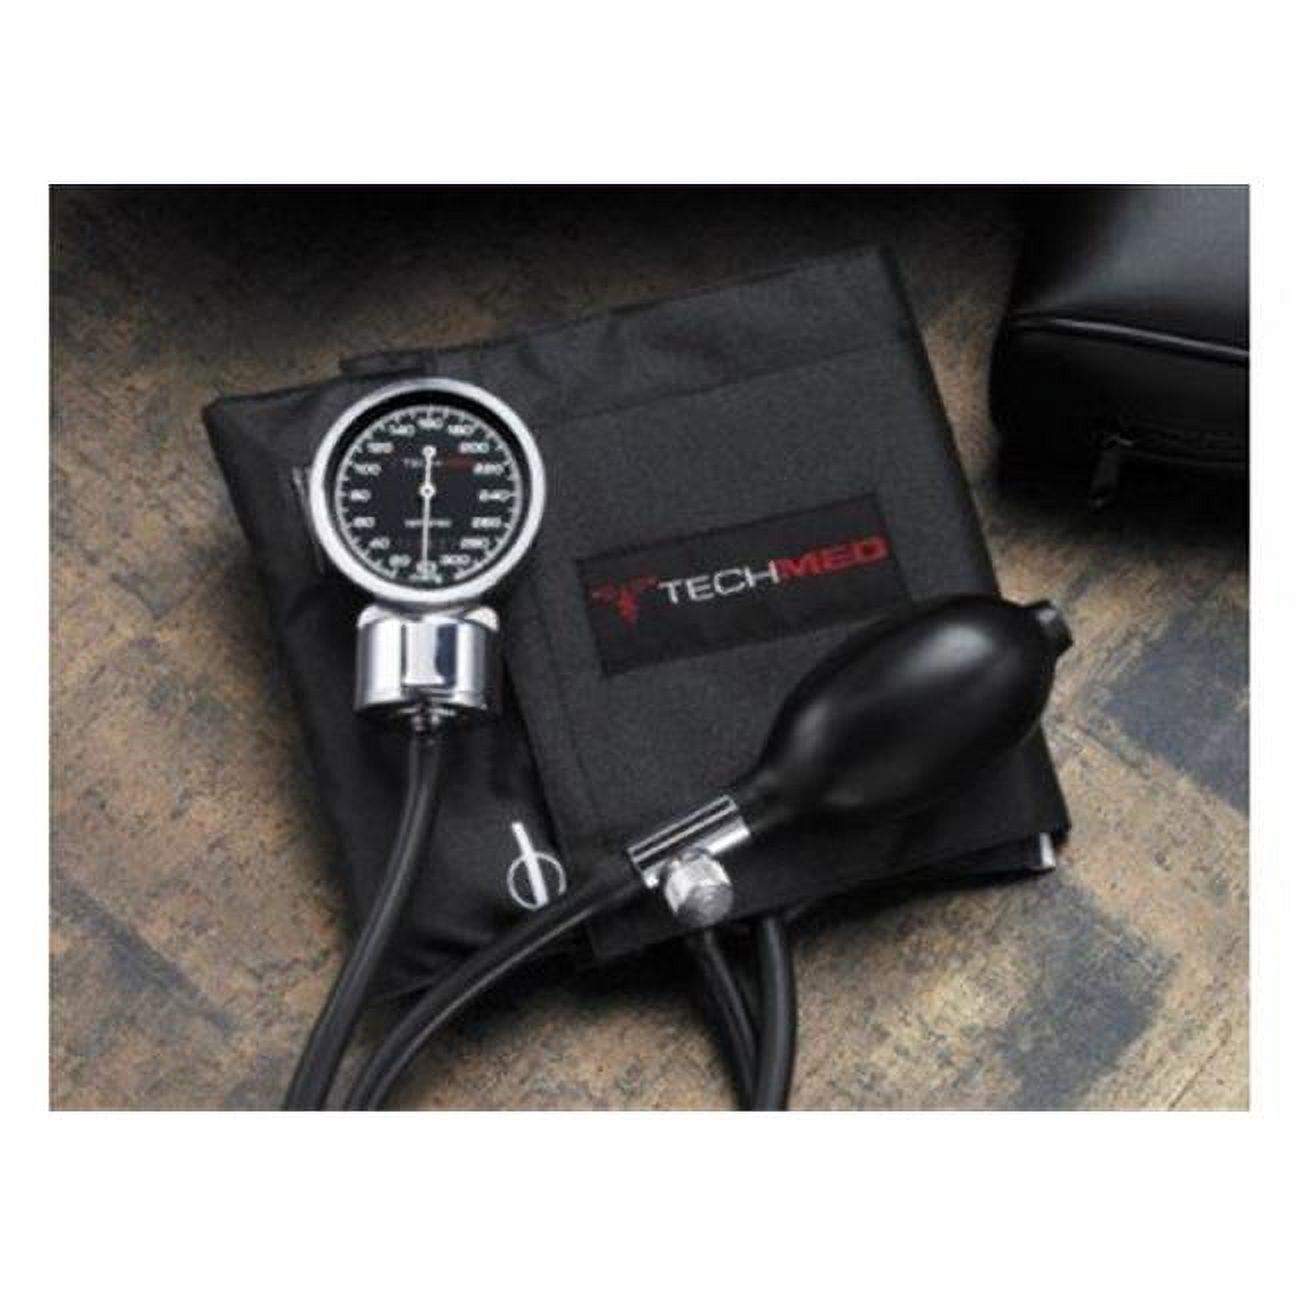 Picture of Tech Med 2010X Deluxe Nylon Sphygmomanometer, Black - Large Adult